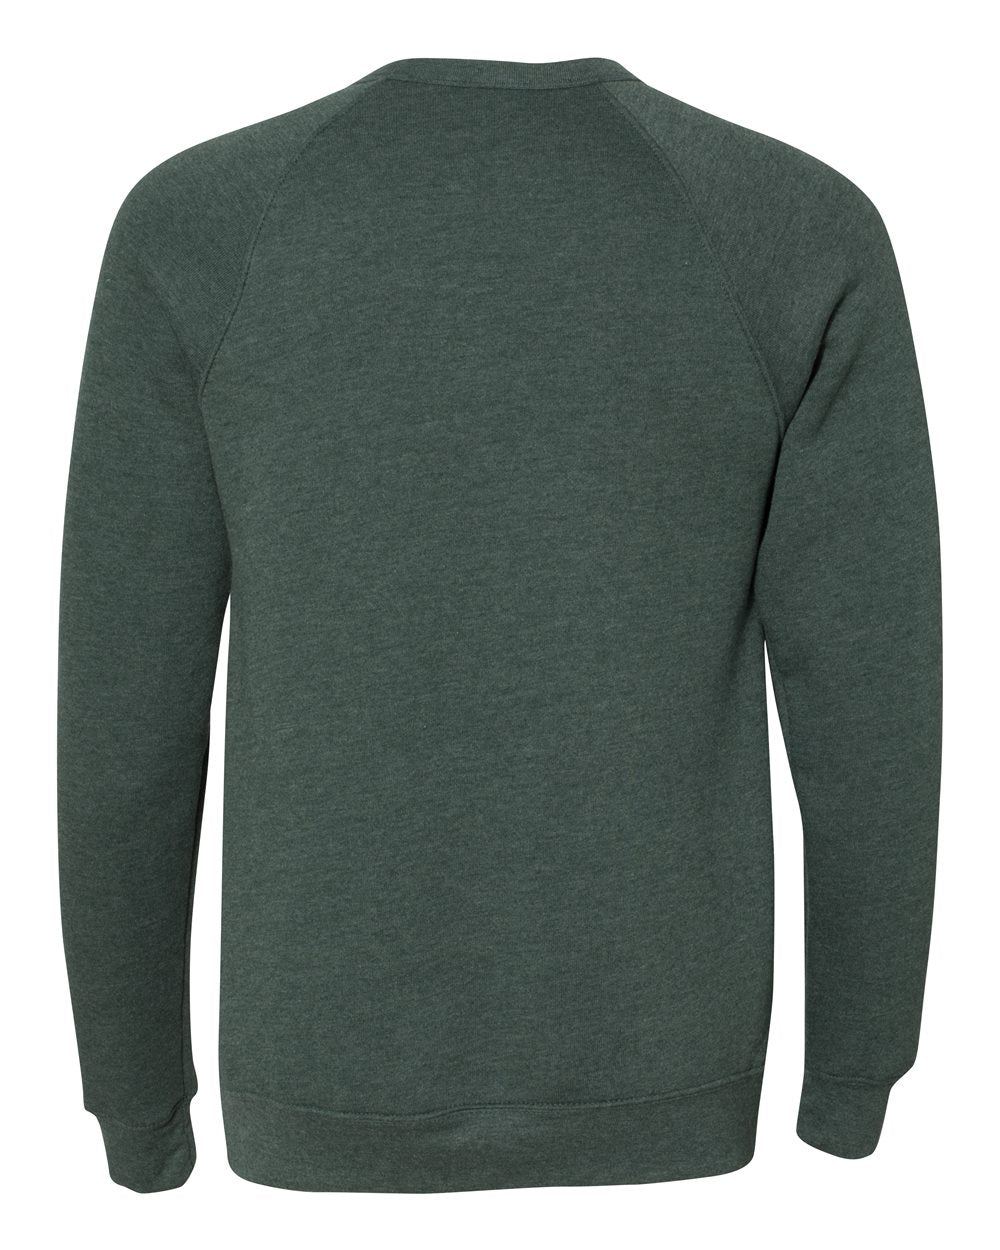 Back of Forest Green Crewneck Sweatshirt from Nudge Printing